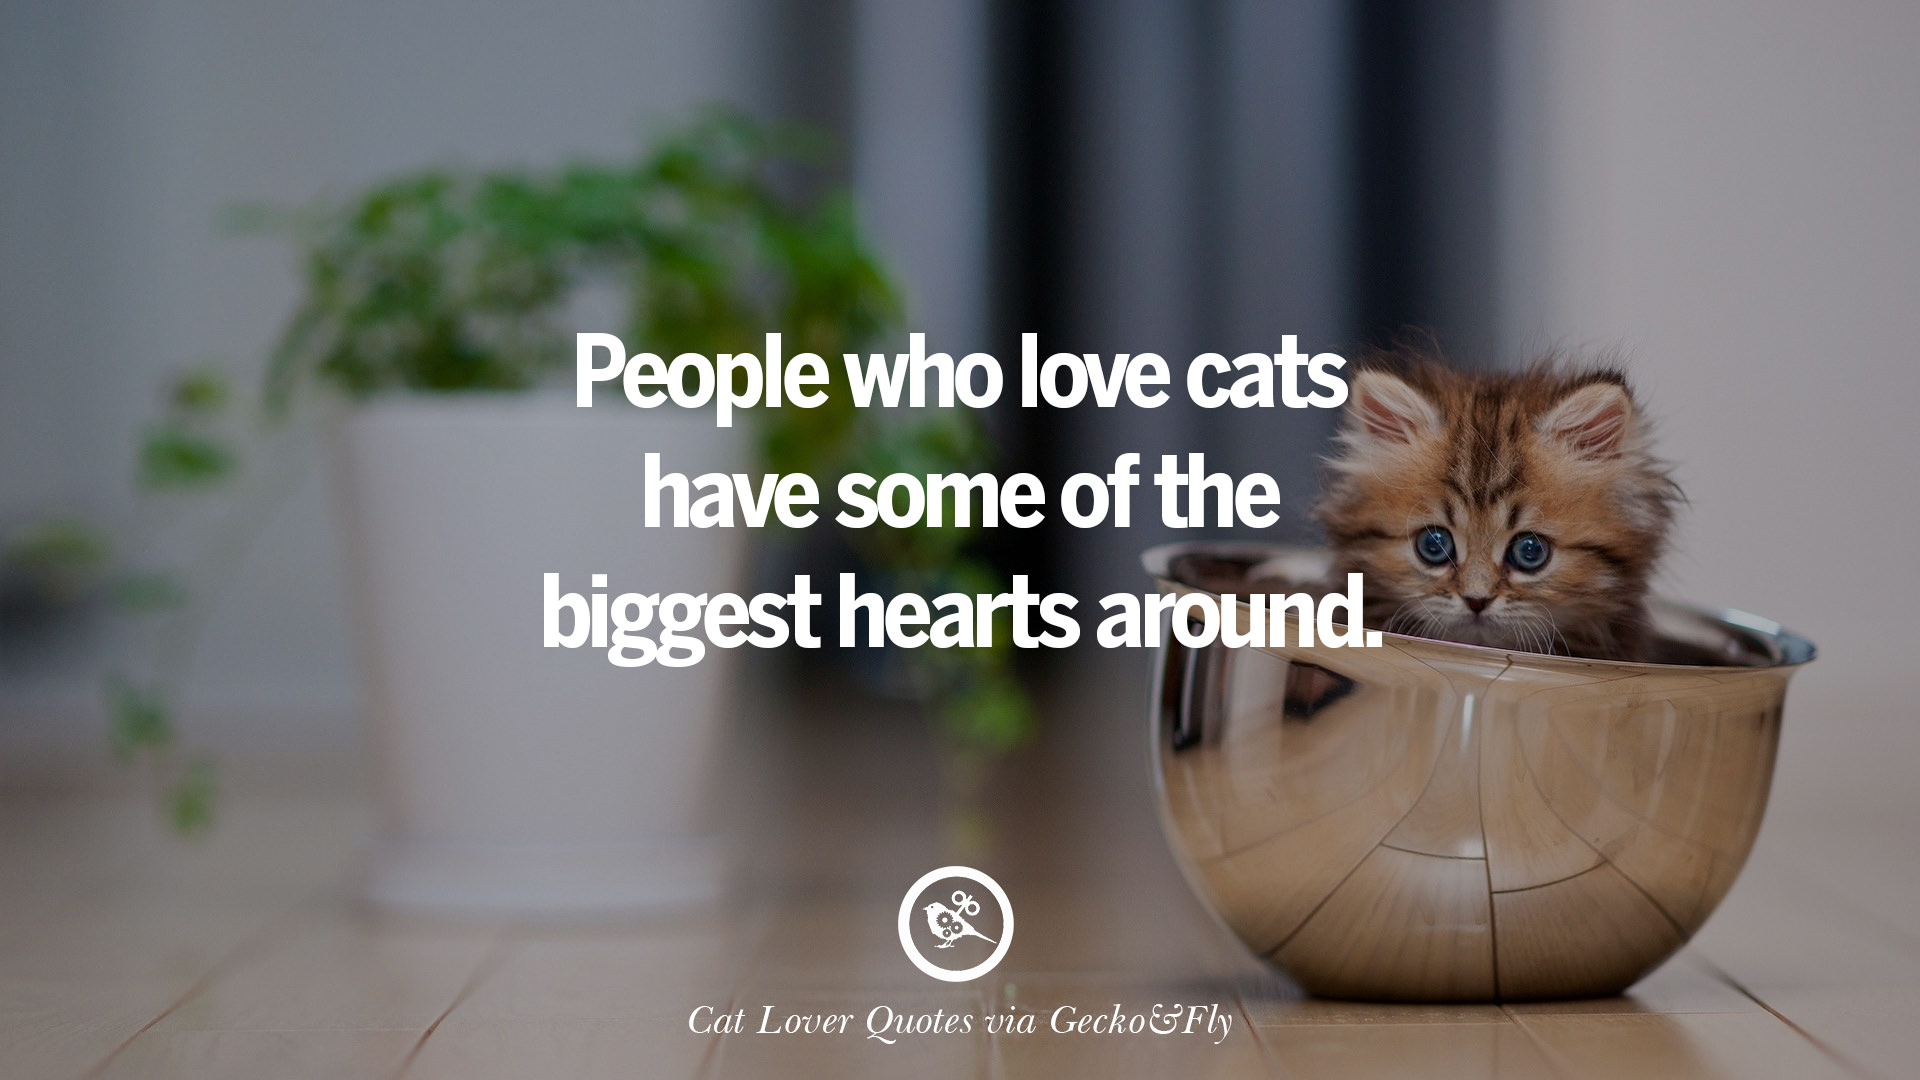 People who love cats have some of the biggest hearts around